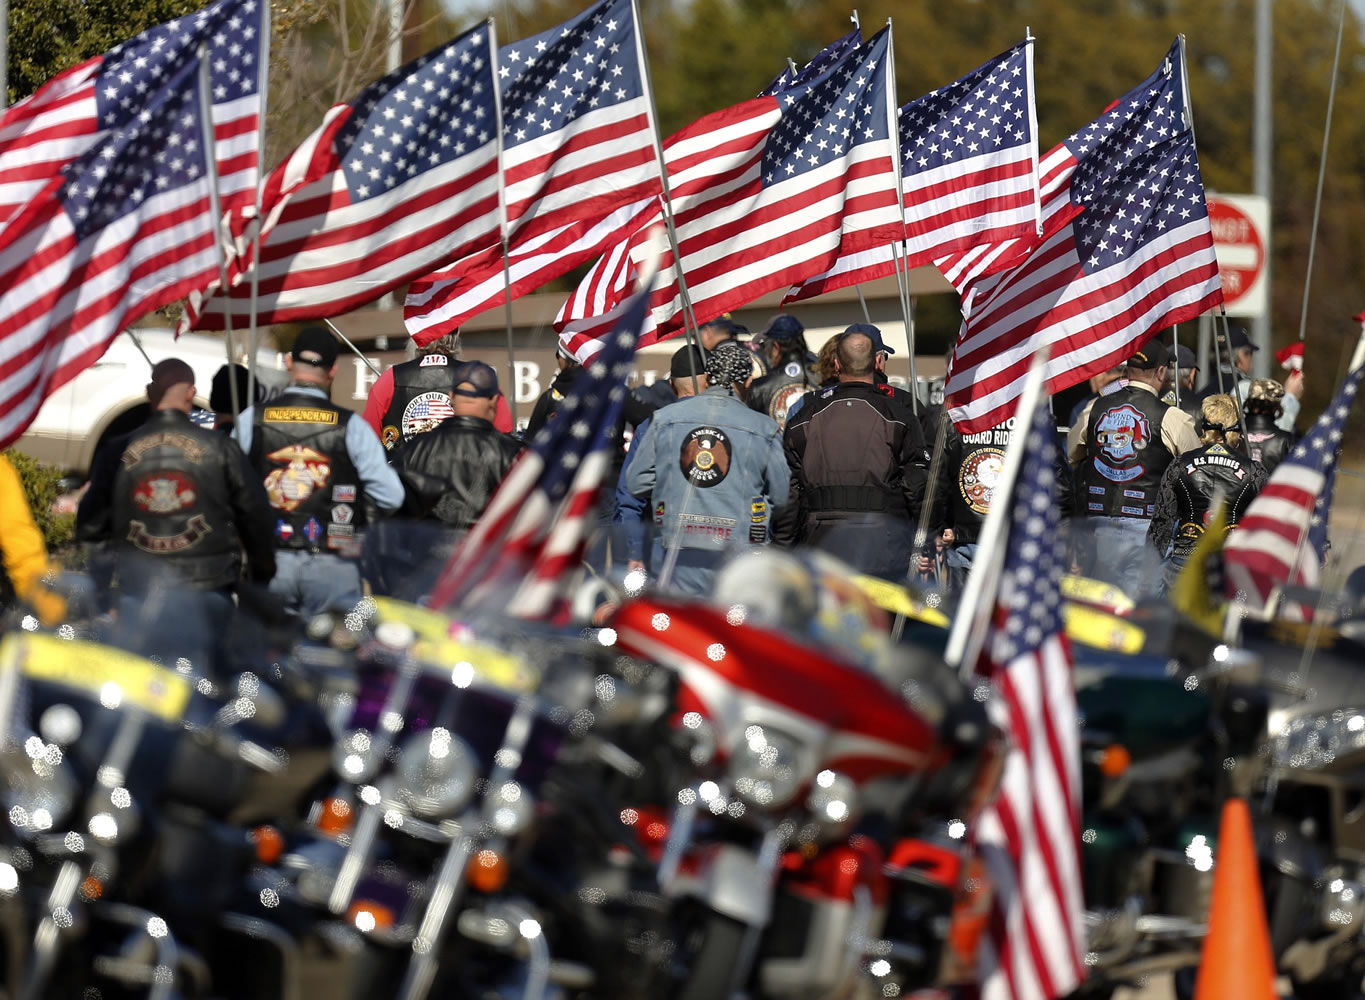 Patriot Guard Riders prepare to form a procession Friday for Chad Littlefield during his funeral at the First Baptist Church of Midlothian, Texas. Littlefield and former Navy SEAL sniper Chris Kyle found dead at a gun range on Feb. 2, 2013.